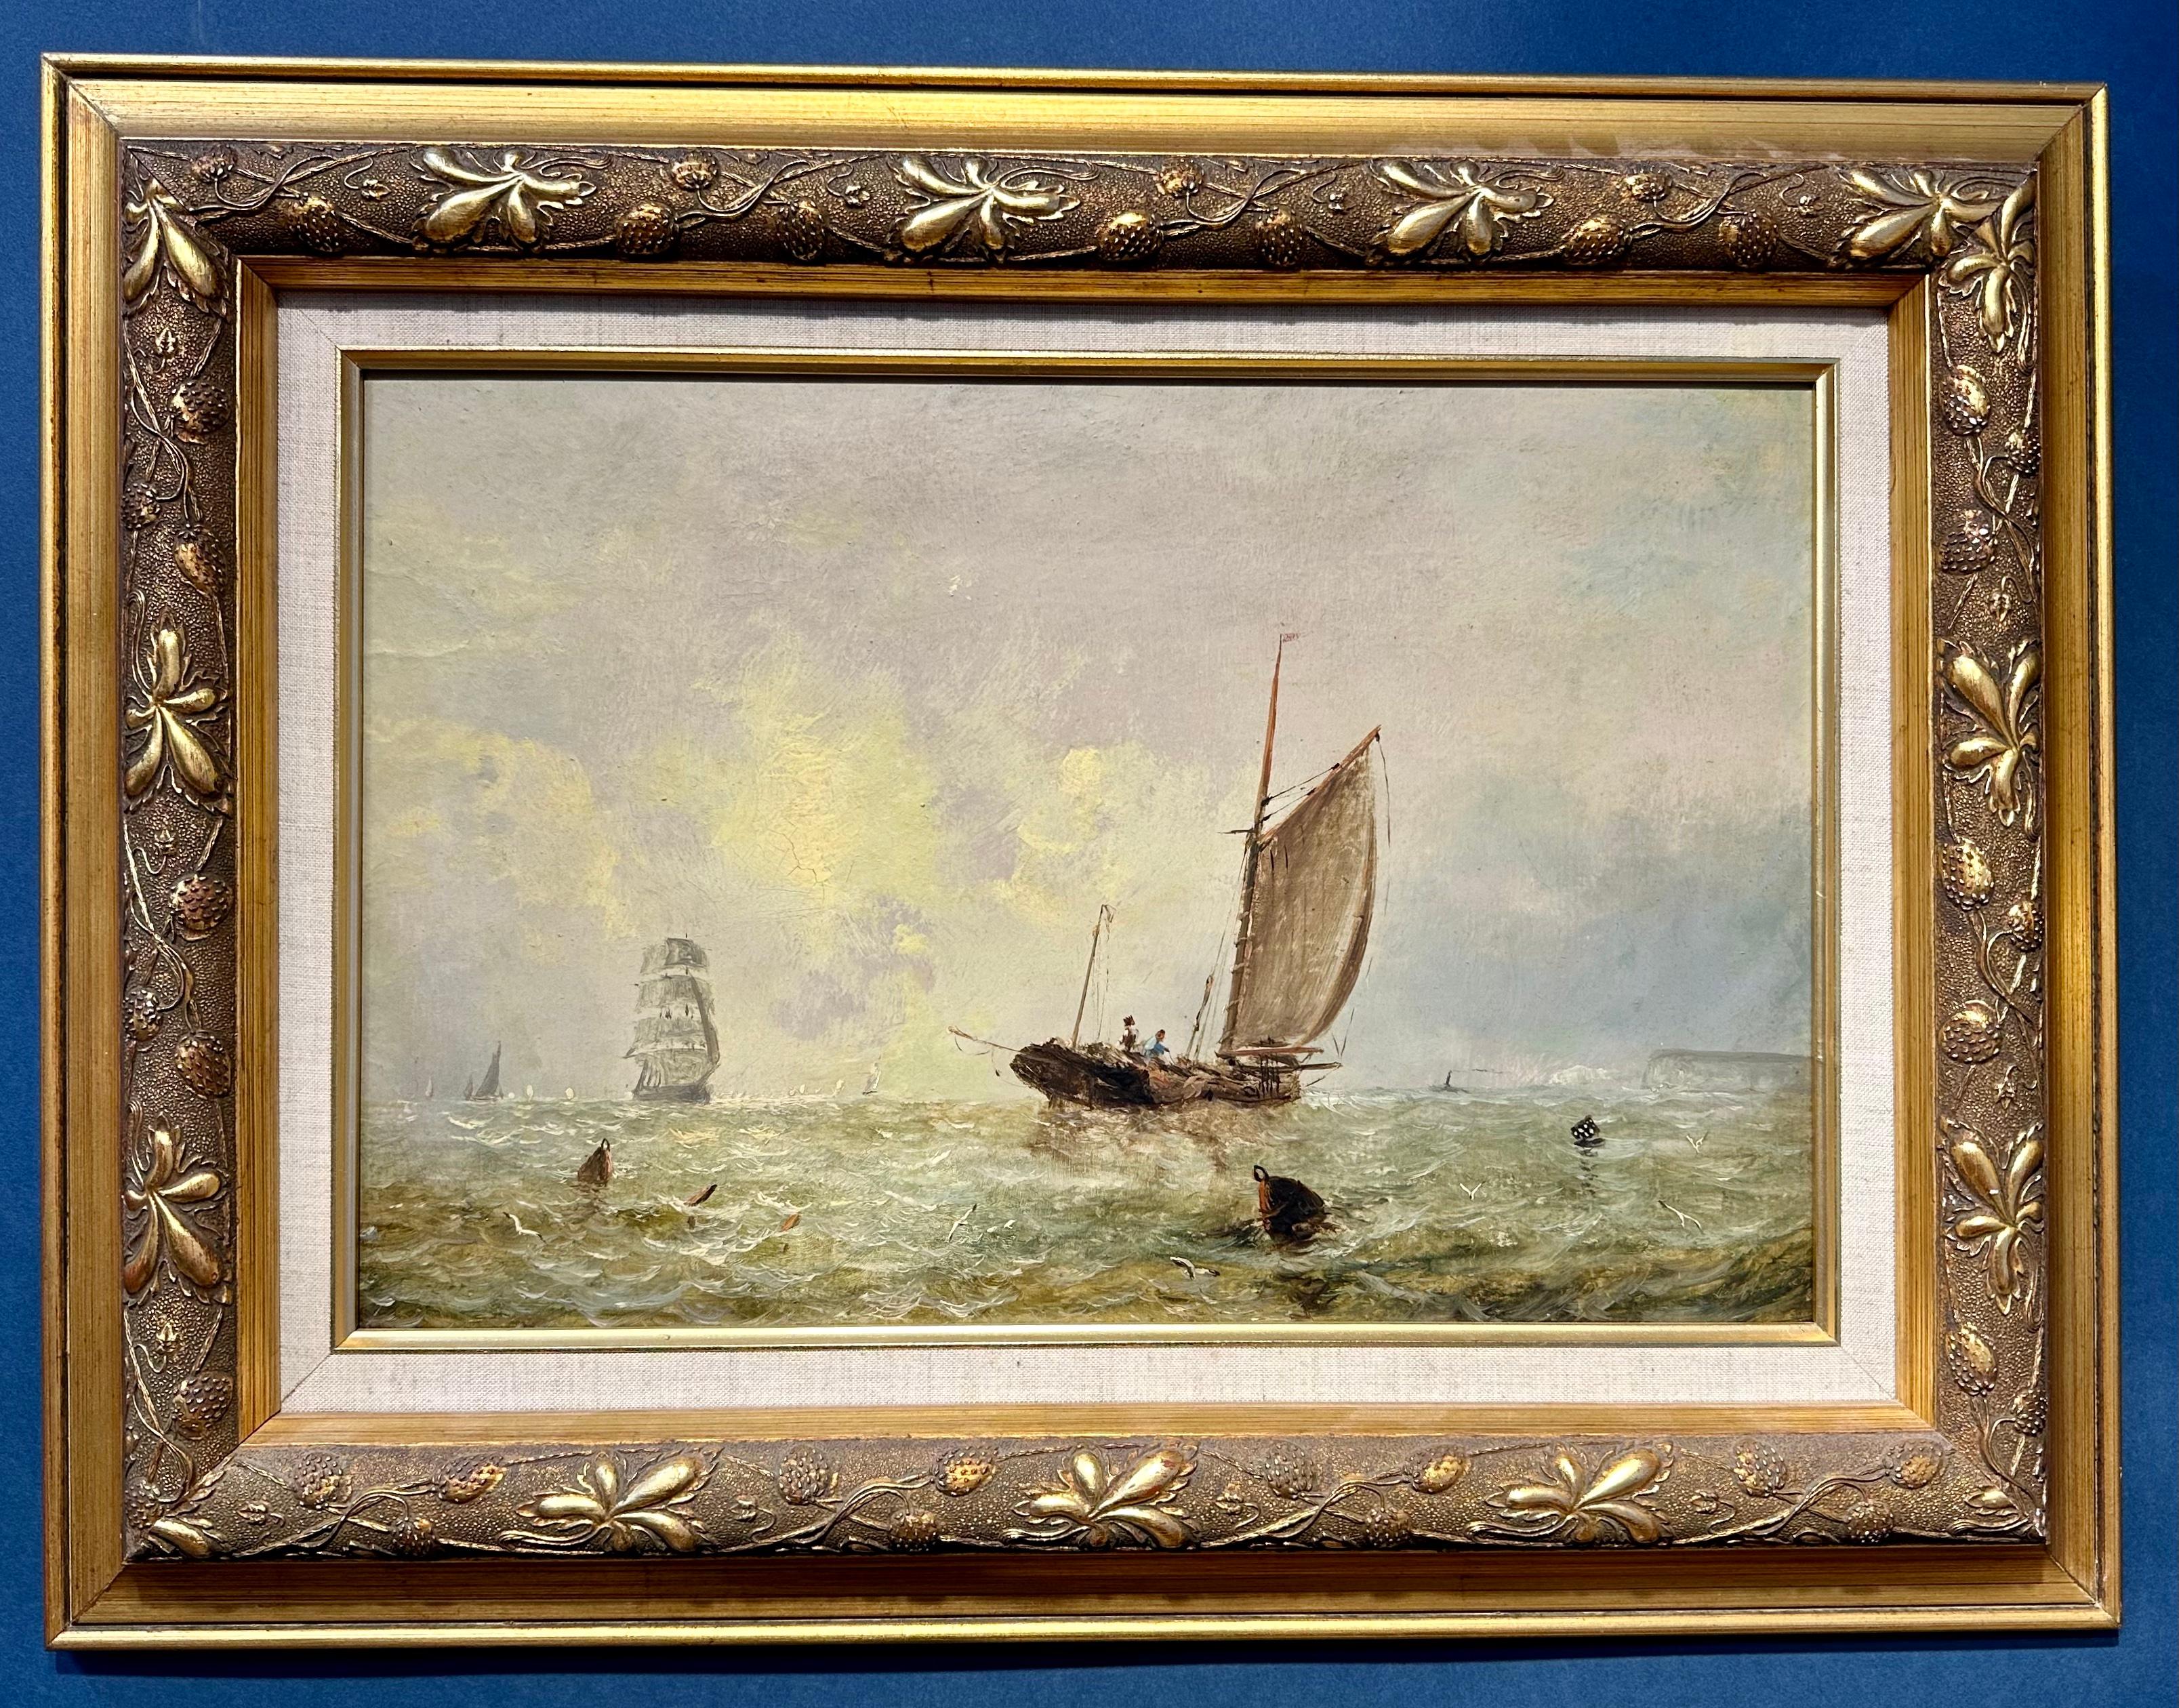 Adolphus Knell Figurative Painting - Antique Victorian, Impressionist 19th century English oil, Fishings boat at Sea